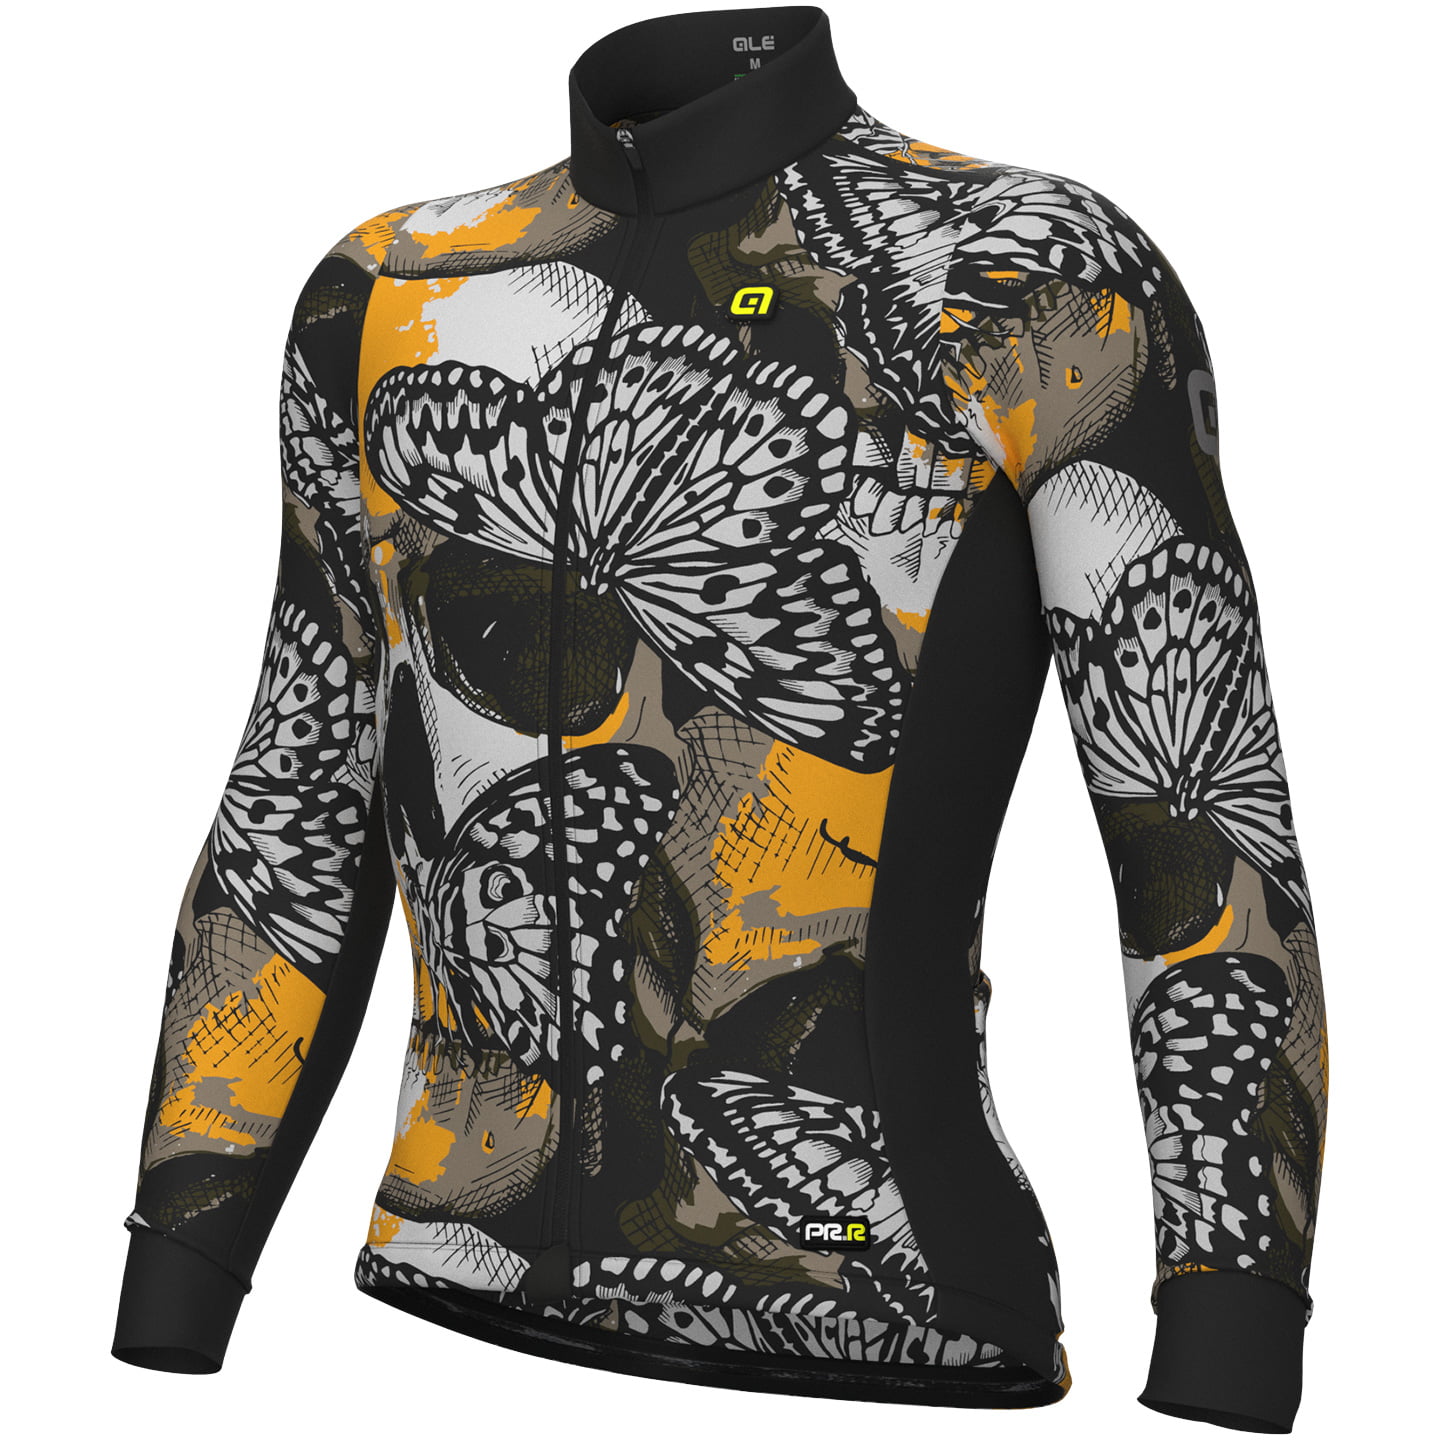 ALE Falena Long Sleeve Jersey Long Sleeve Jersey, for men, size L, Cycling jersey, Cycling clothing